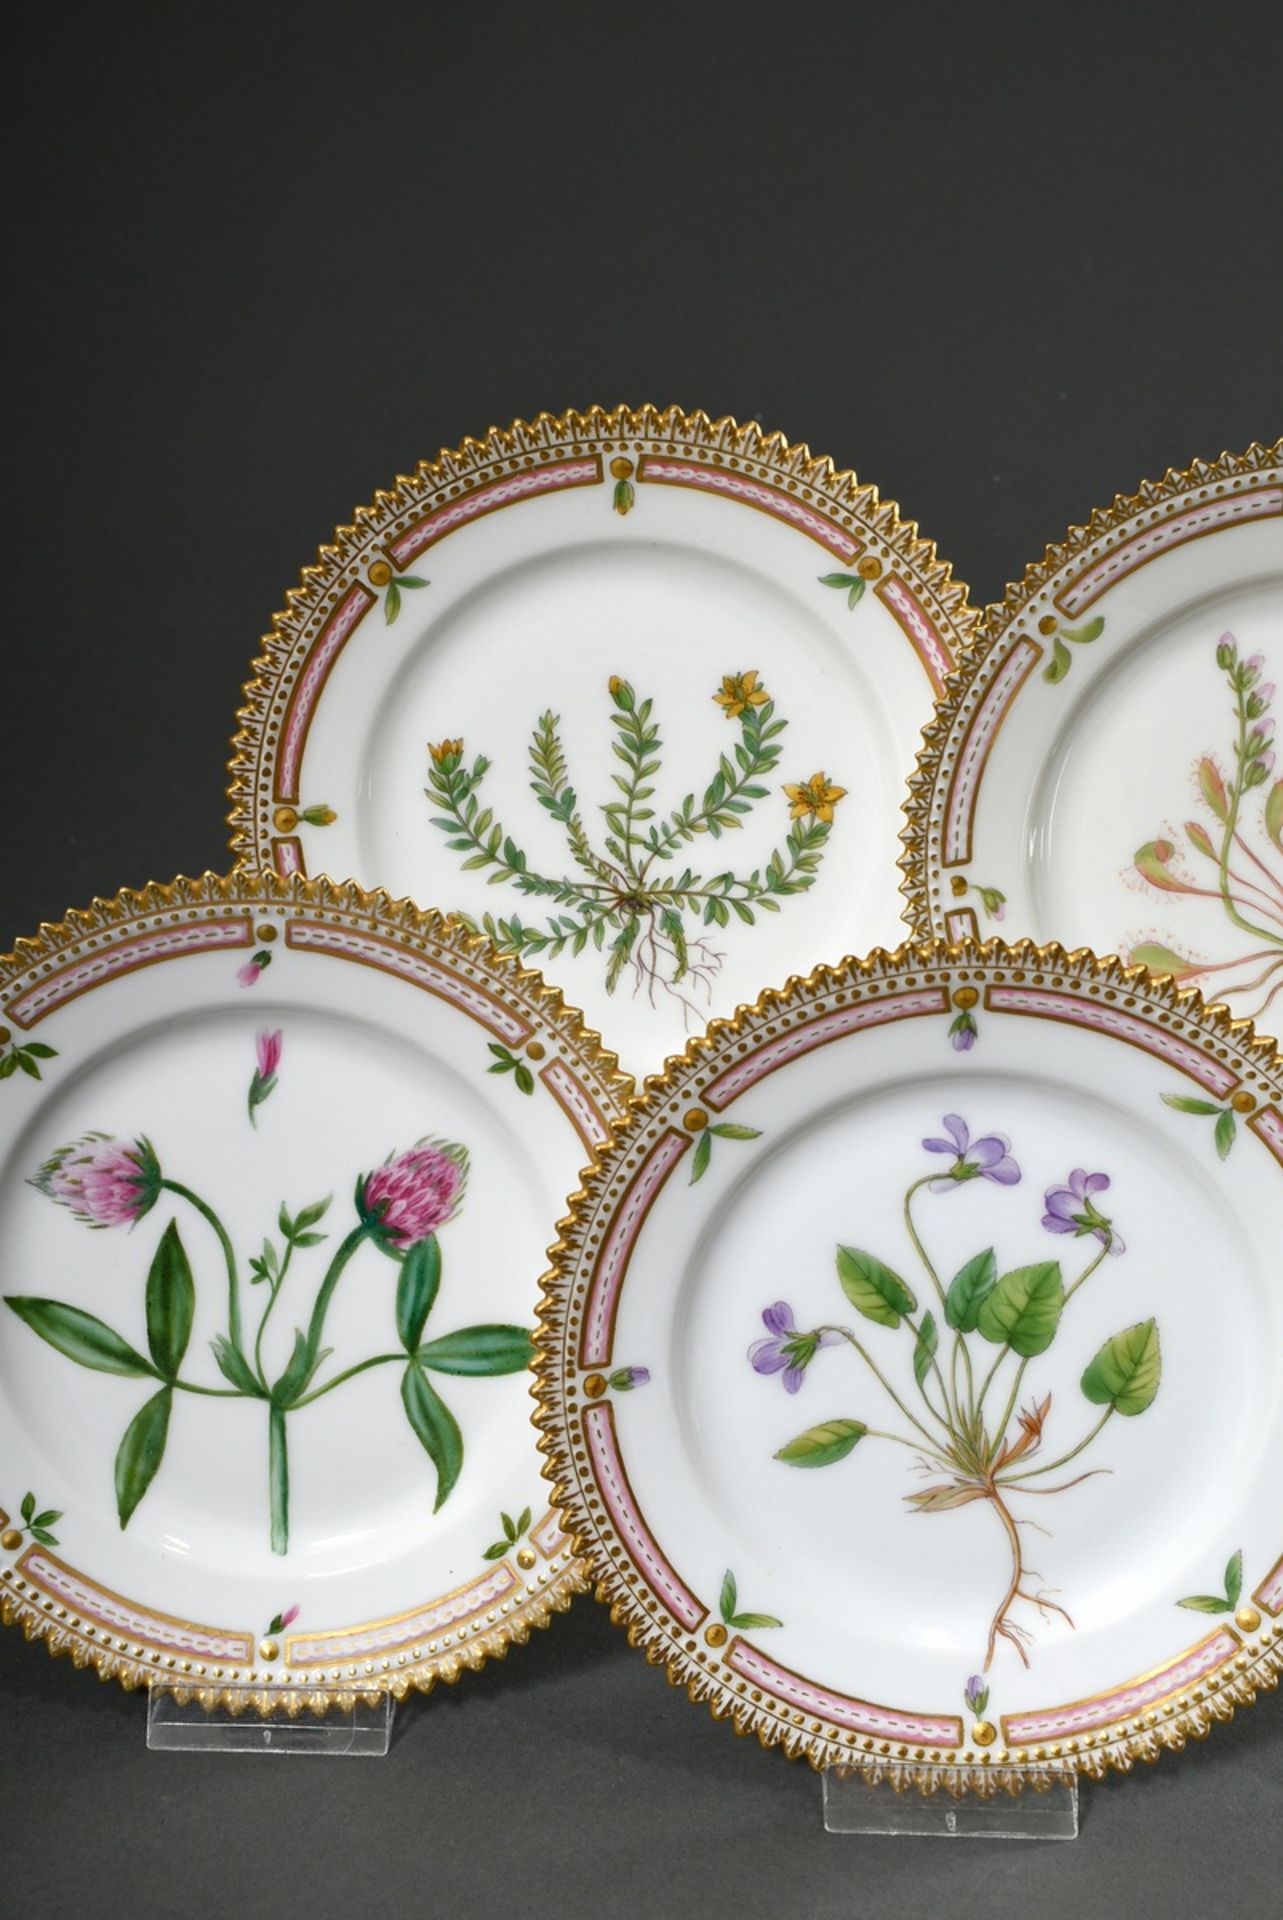 7 Royal Copenhagen "Flora Danica" bread plate with polychrome painting in the mirror and gold decor - Image 4 of 13